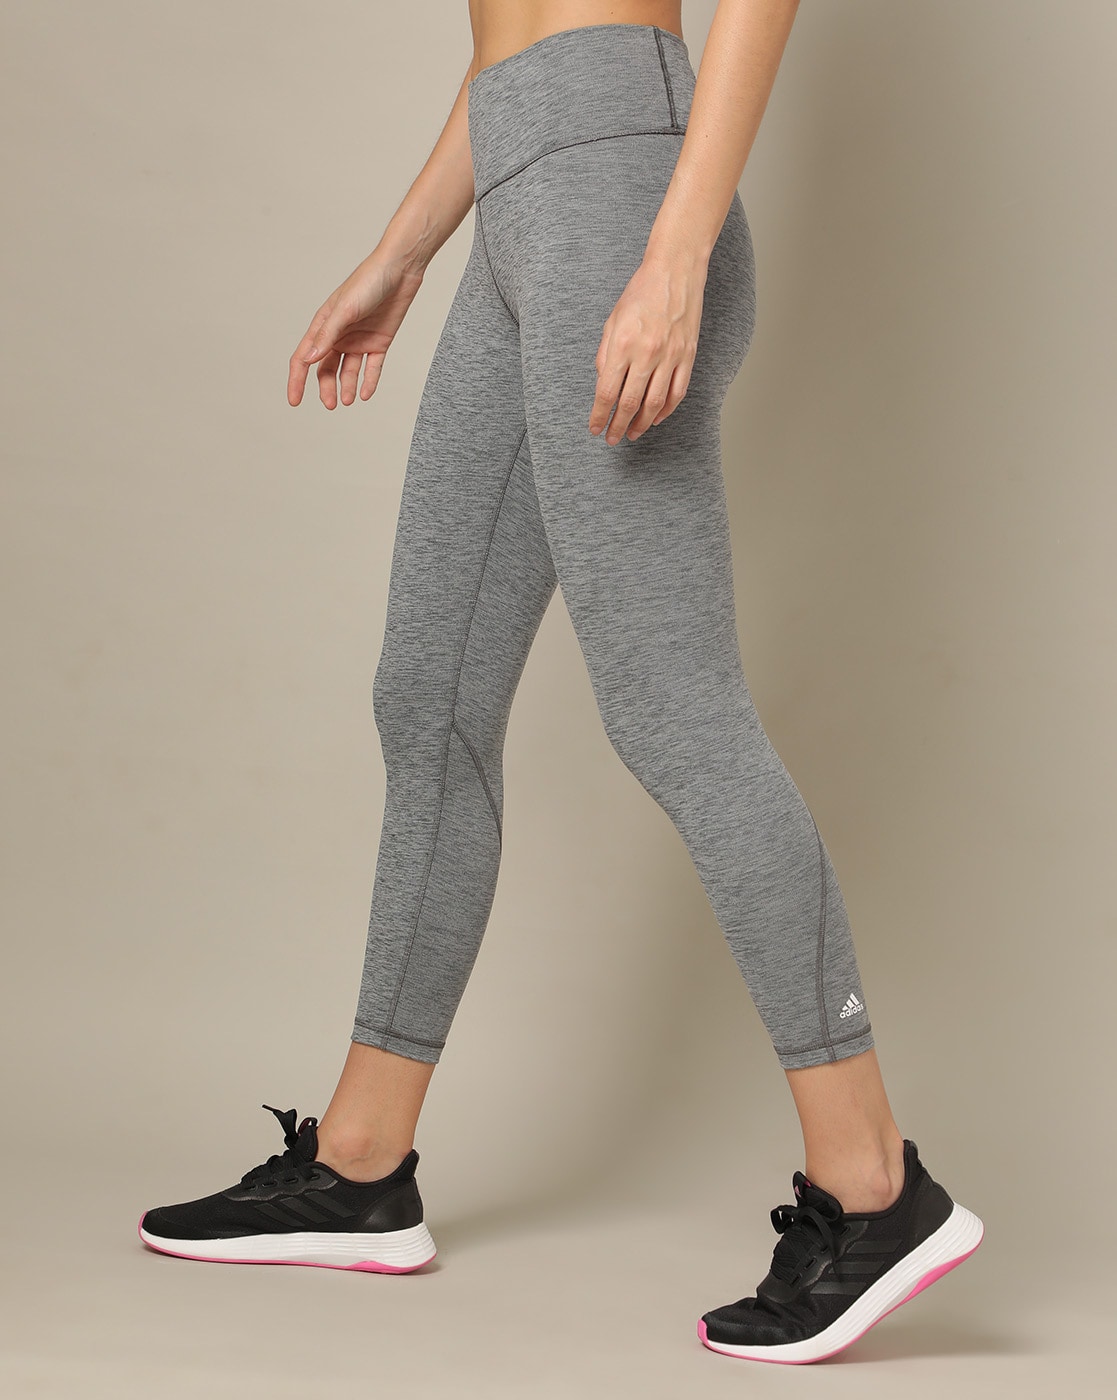 Adidas Tech Fit Climalite Womens Large Gray Athletic Yoga Sports